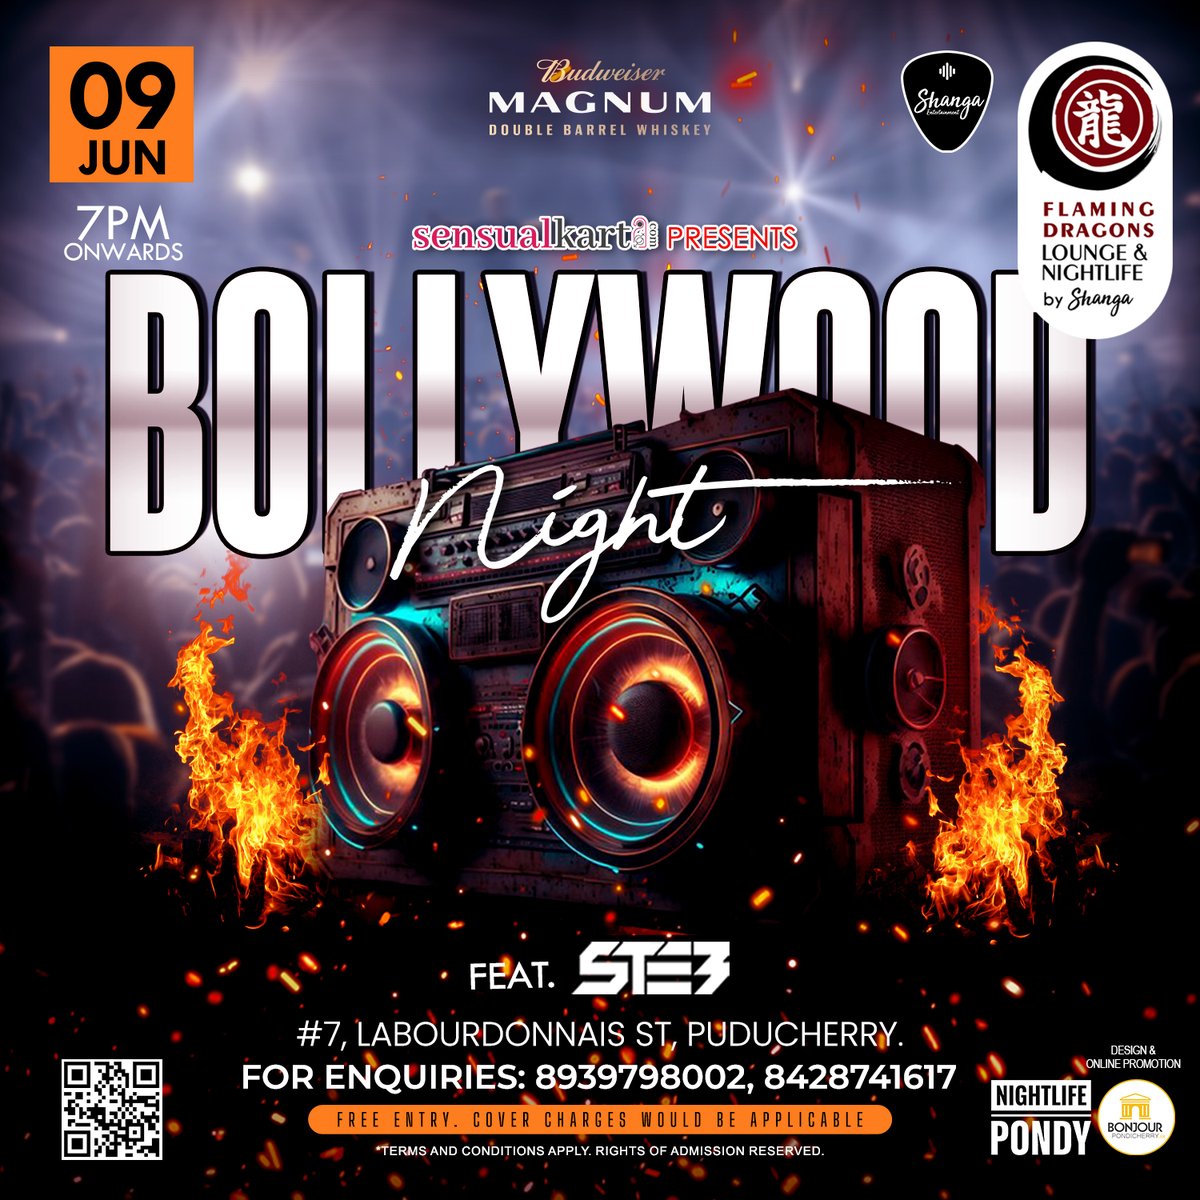 Bollywood Night - DJ Party on 09 June - 7pm onwards

Flaming Dragons Lounge and Nightlife
📍7, Labourdonnais St, #Puducherry
☎️: +91 8939798002

#pondicherry #flamingdragons #bonjourpondicherry #pondicherrynightlife #pondicherrytourism #nightlife #bollywoodnight #bollywooddj